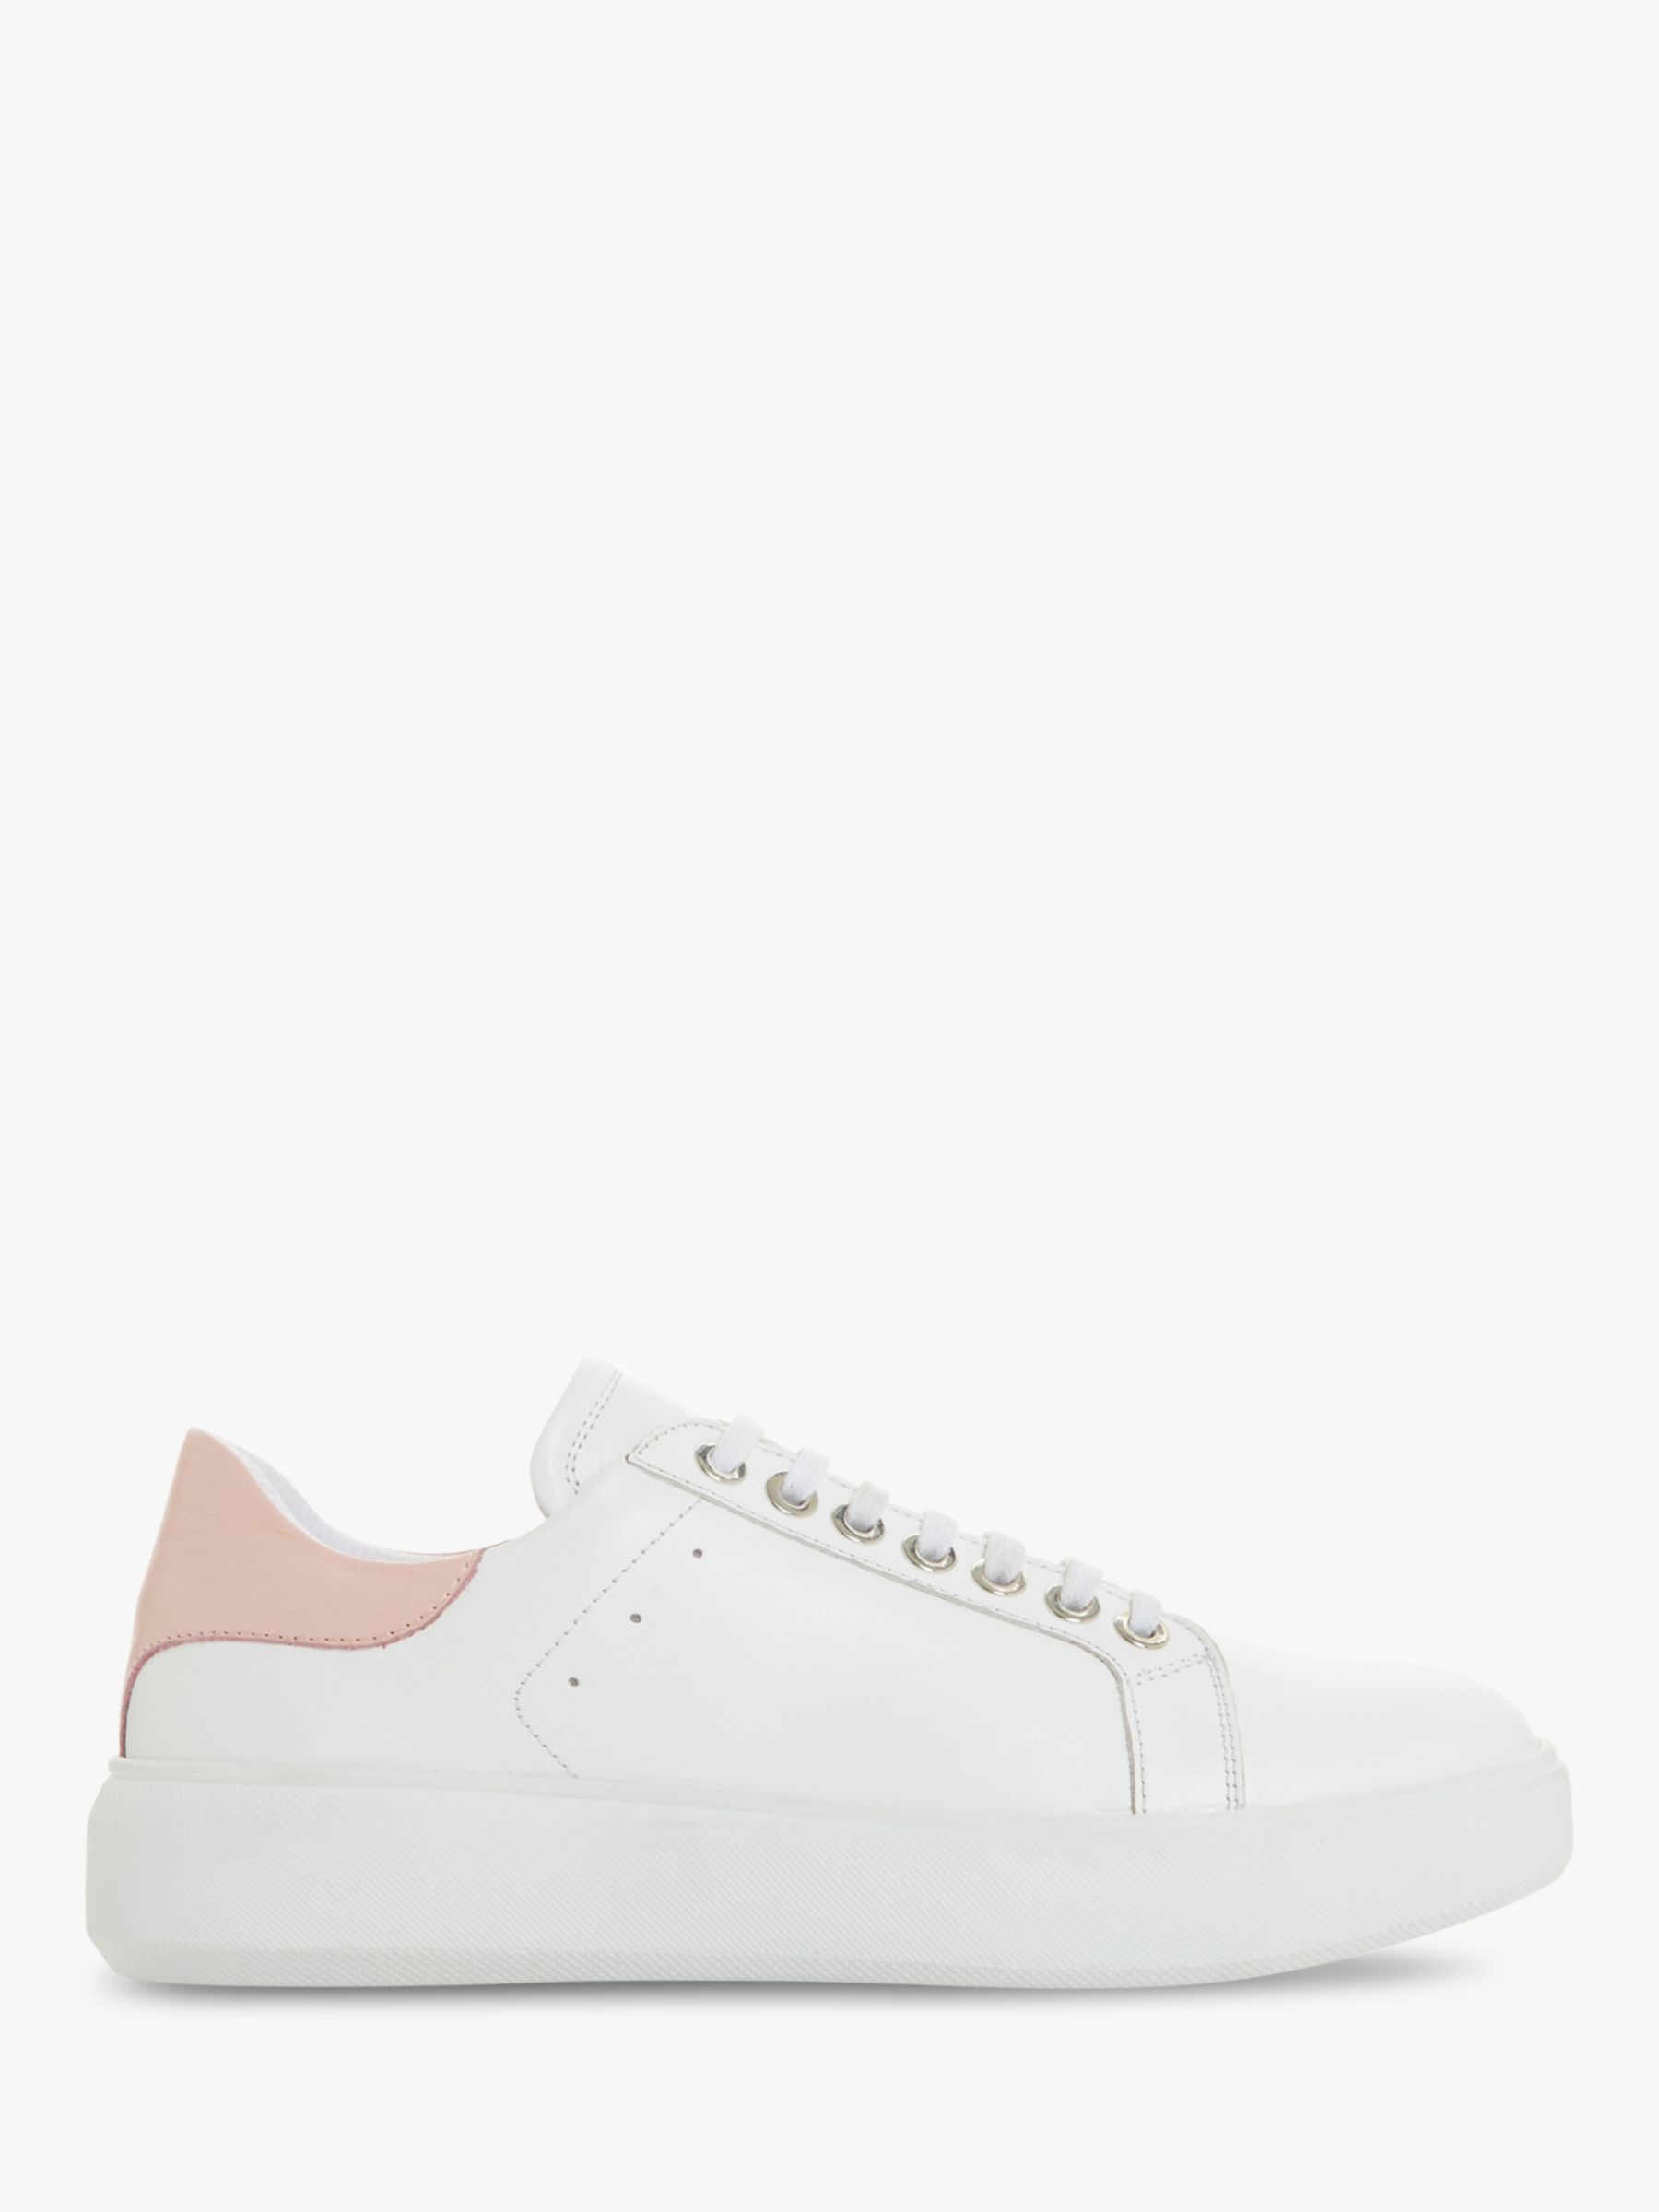 Dune Entity Leather Lace Up Trainers